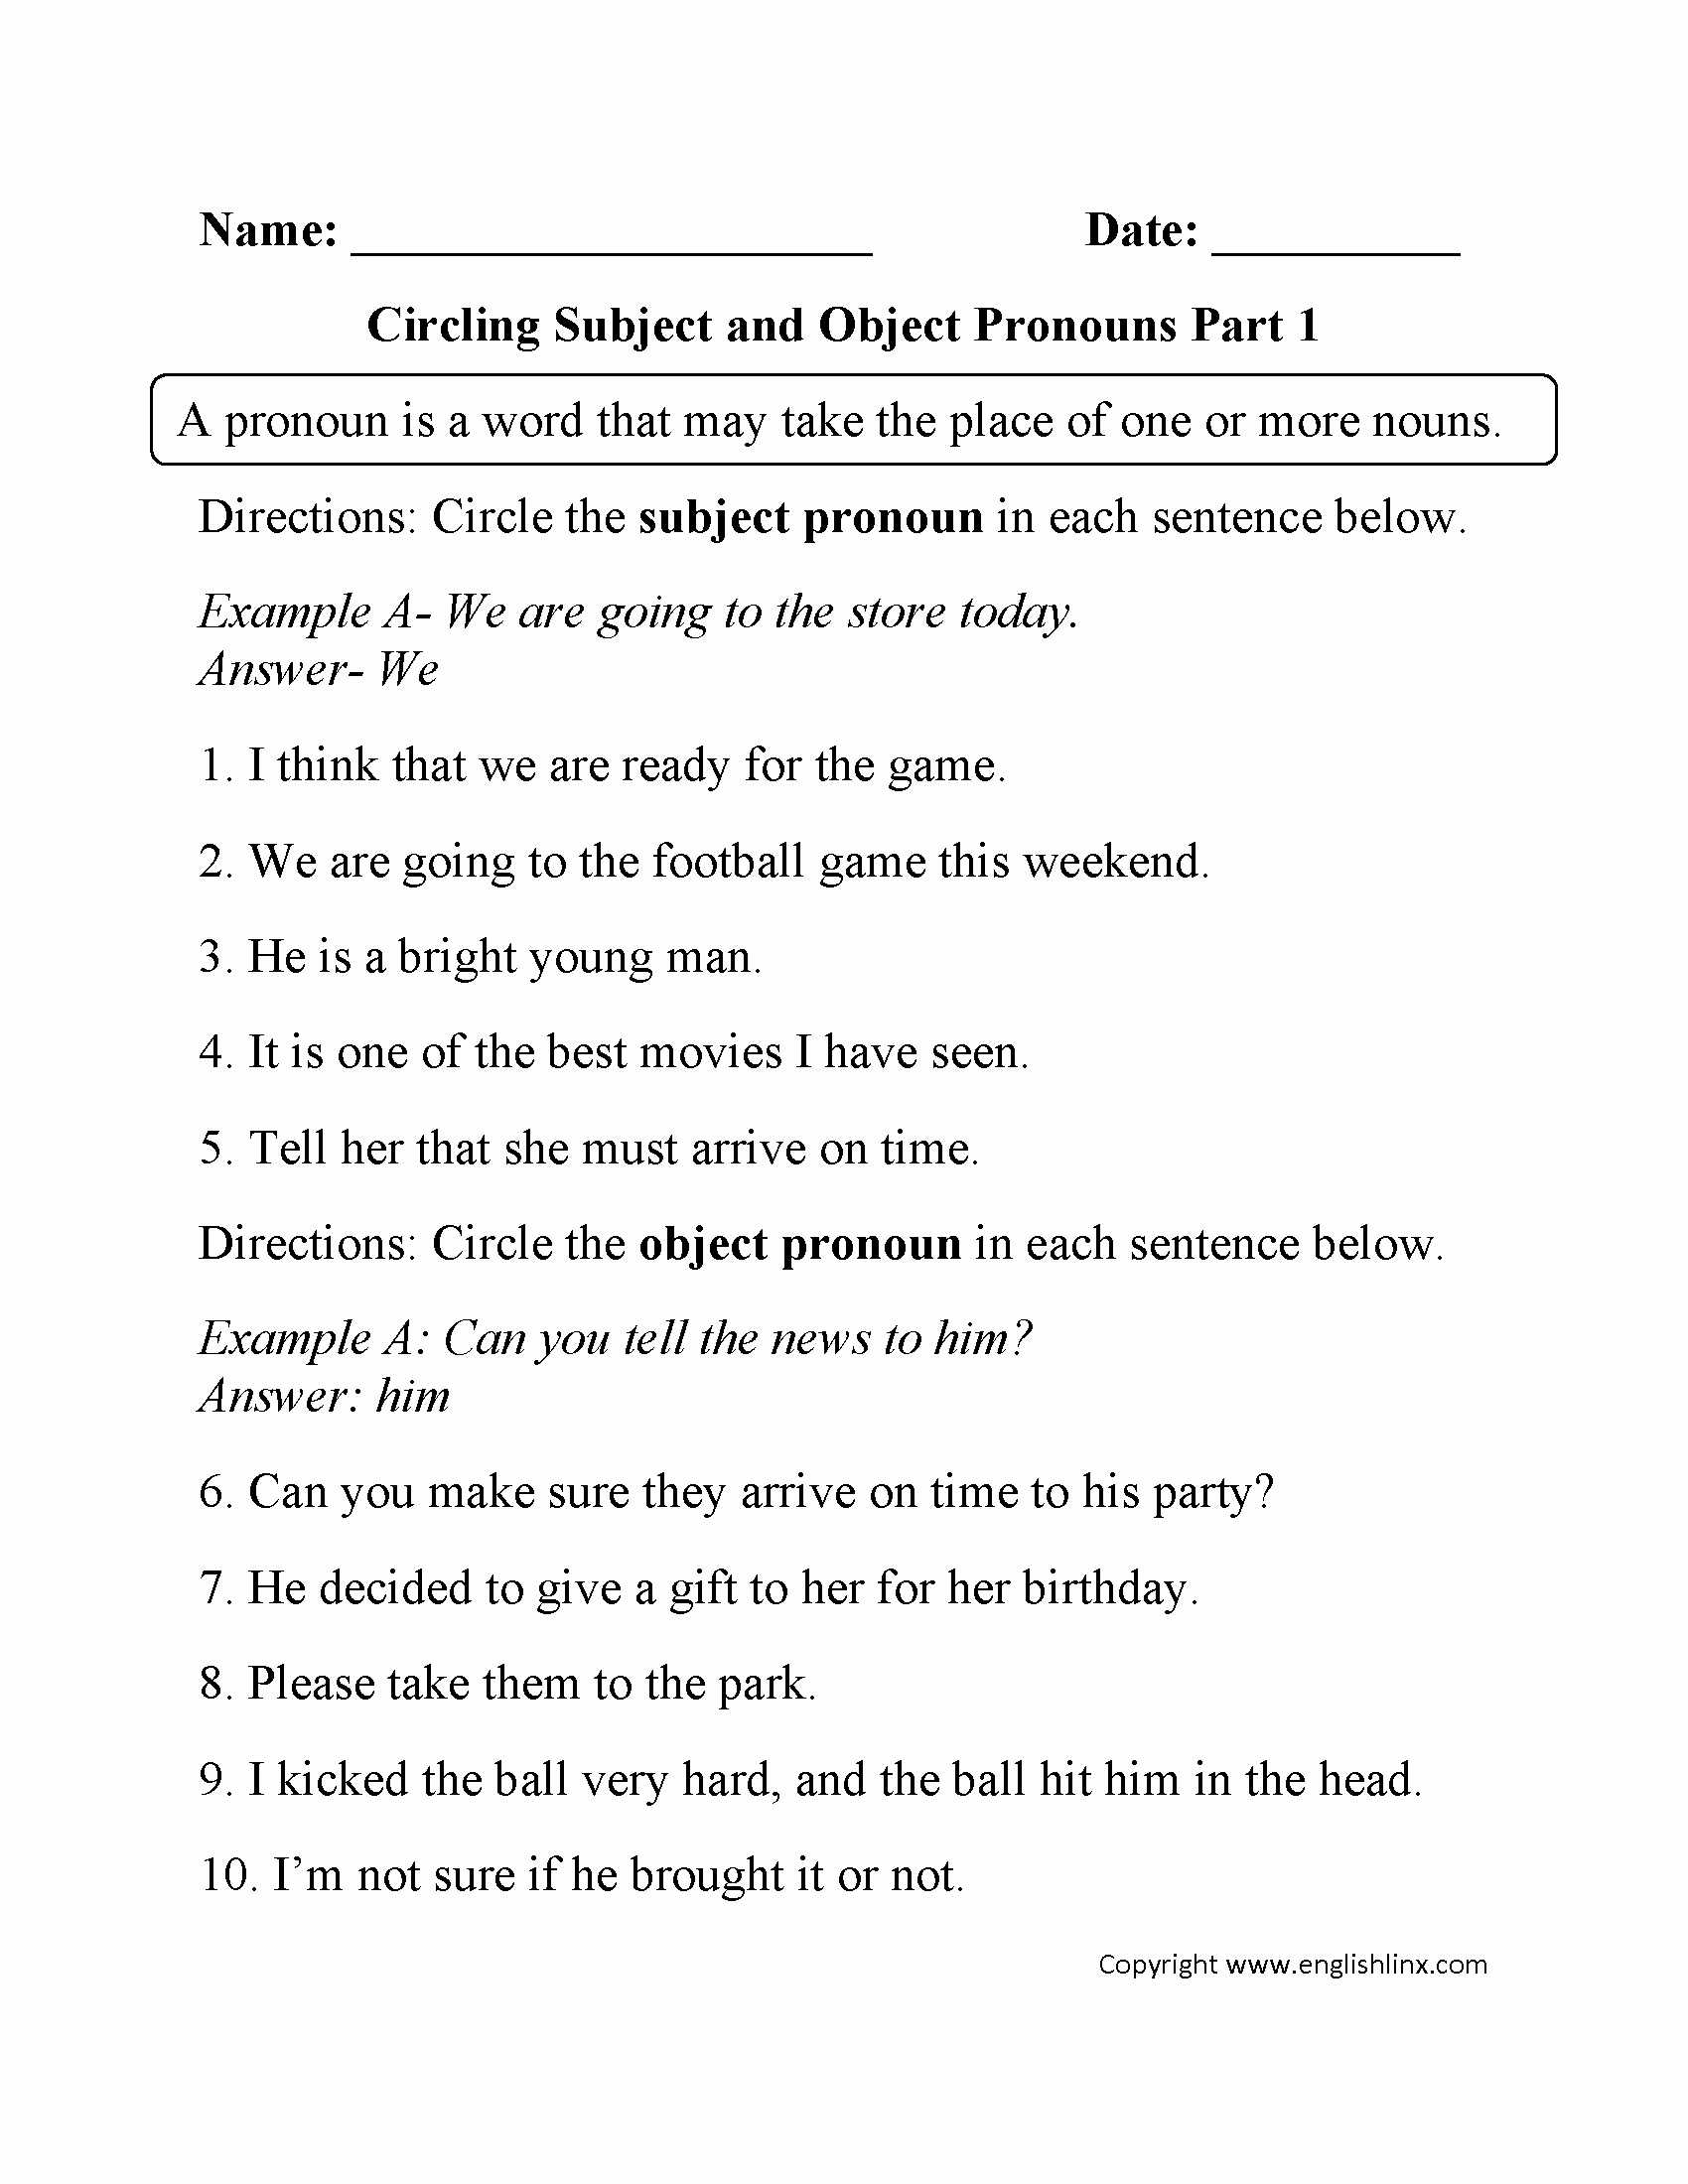 Pronouns and Antecedents Worksheets or 15 Lovely Pronoun Antecedent Agreement Quiz